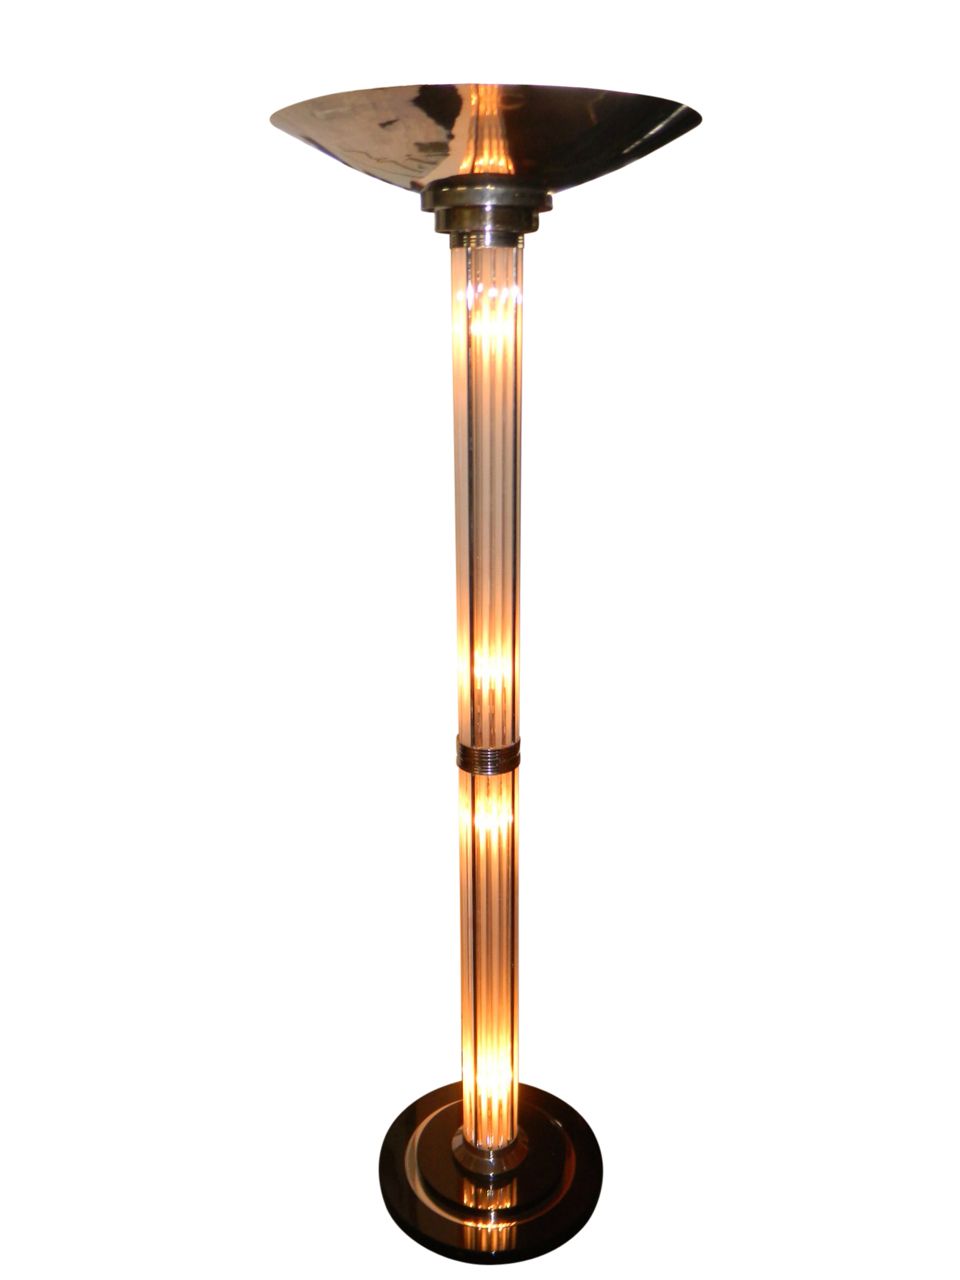 Floor lamp with lights and glass rods art deco